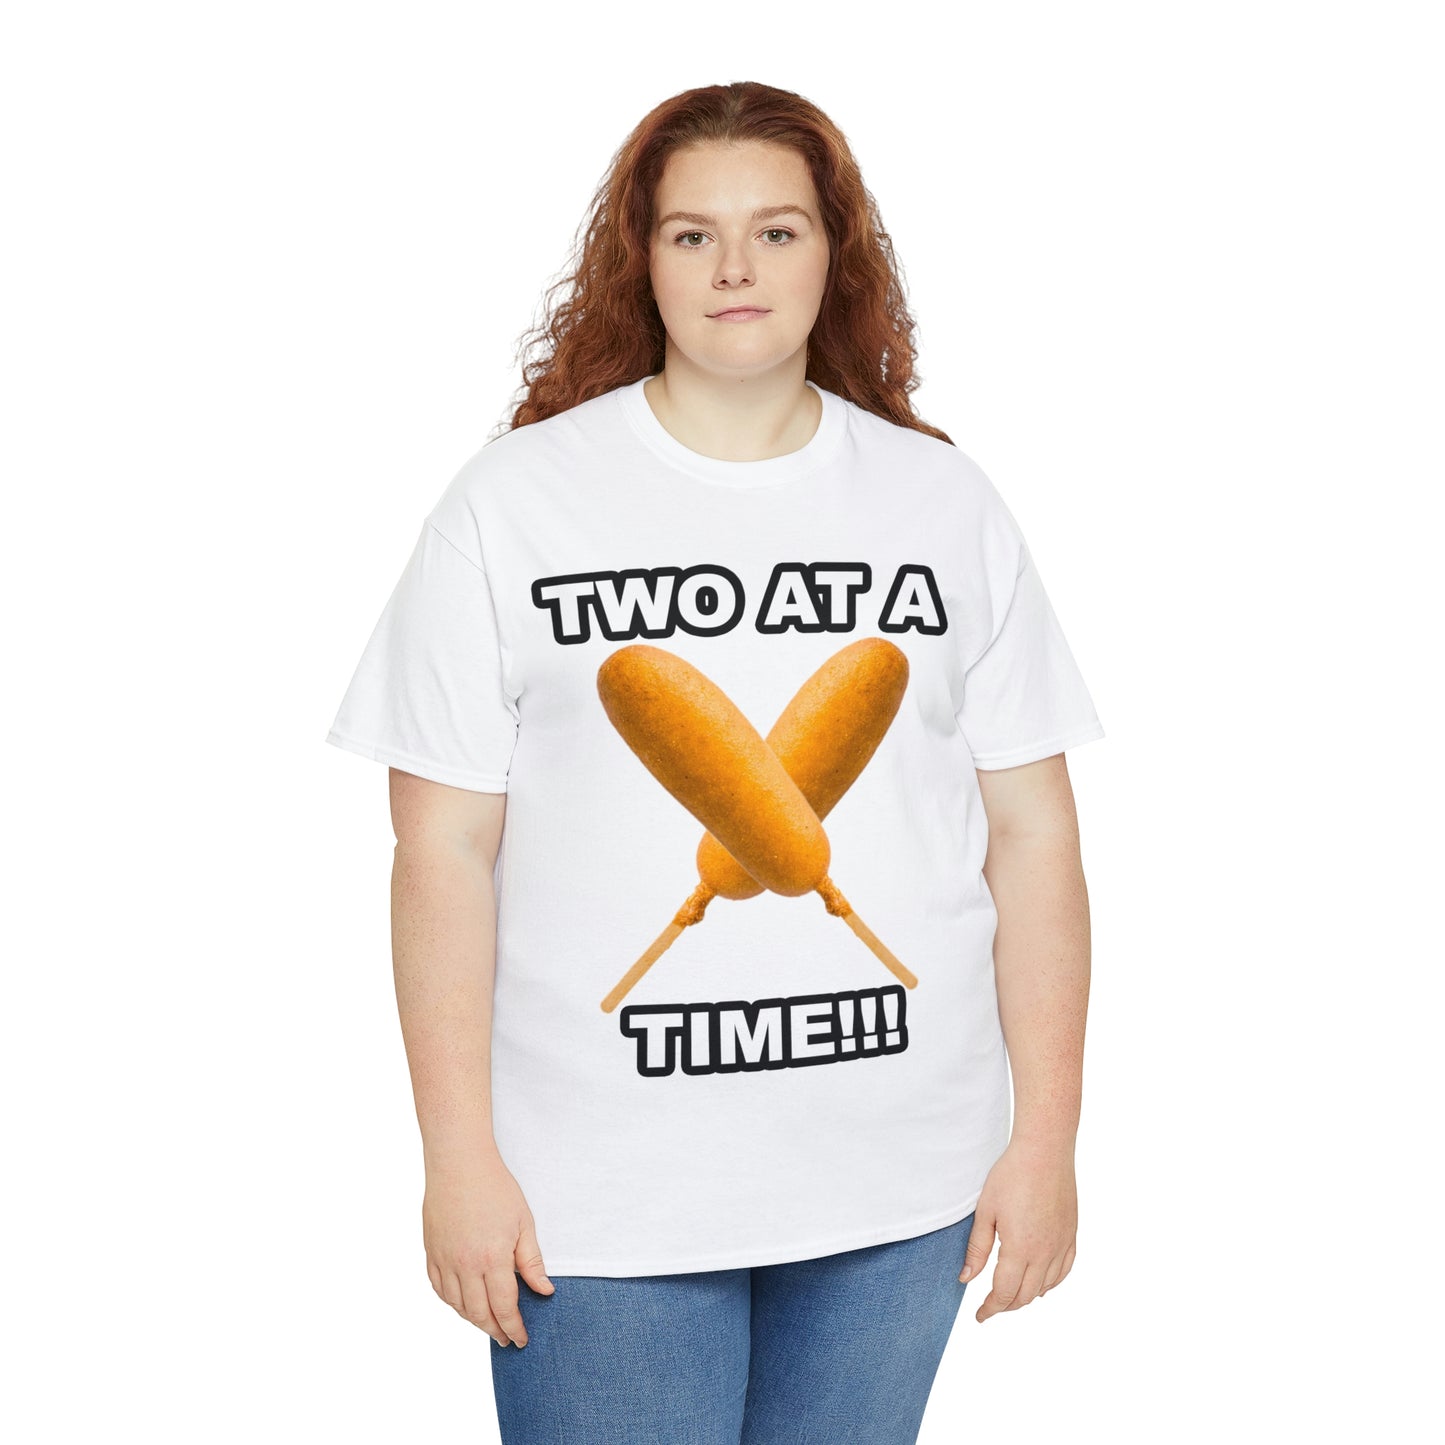 Corndogs Two At A Time Shirt - Up to 5X